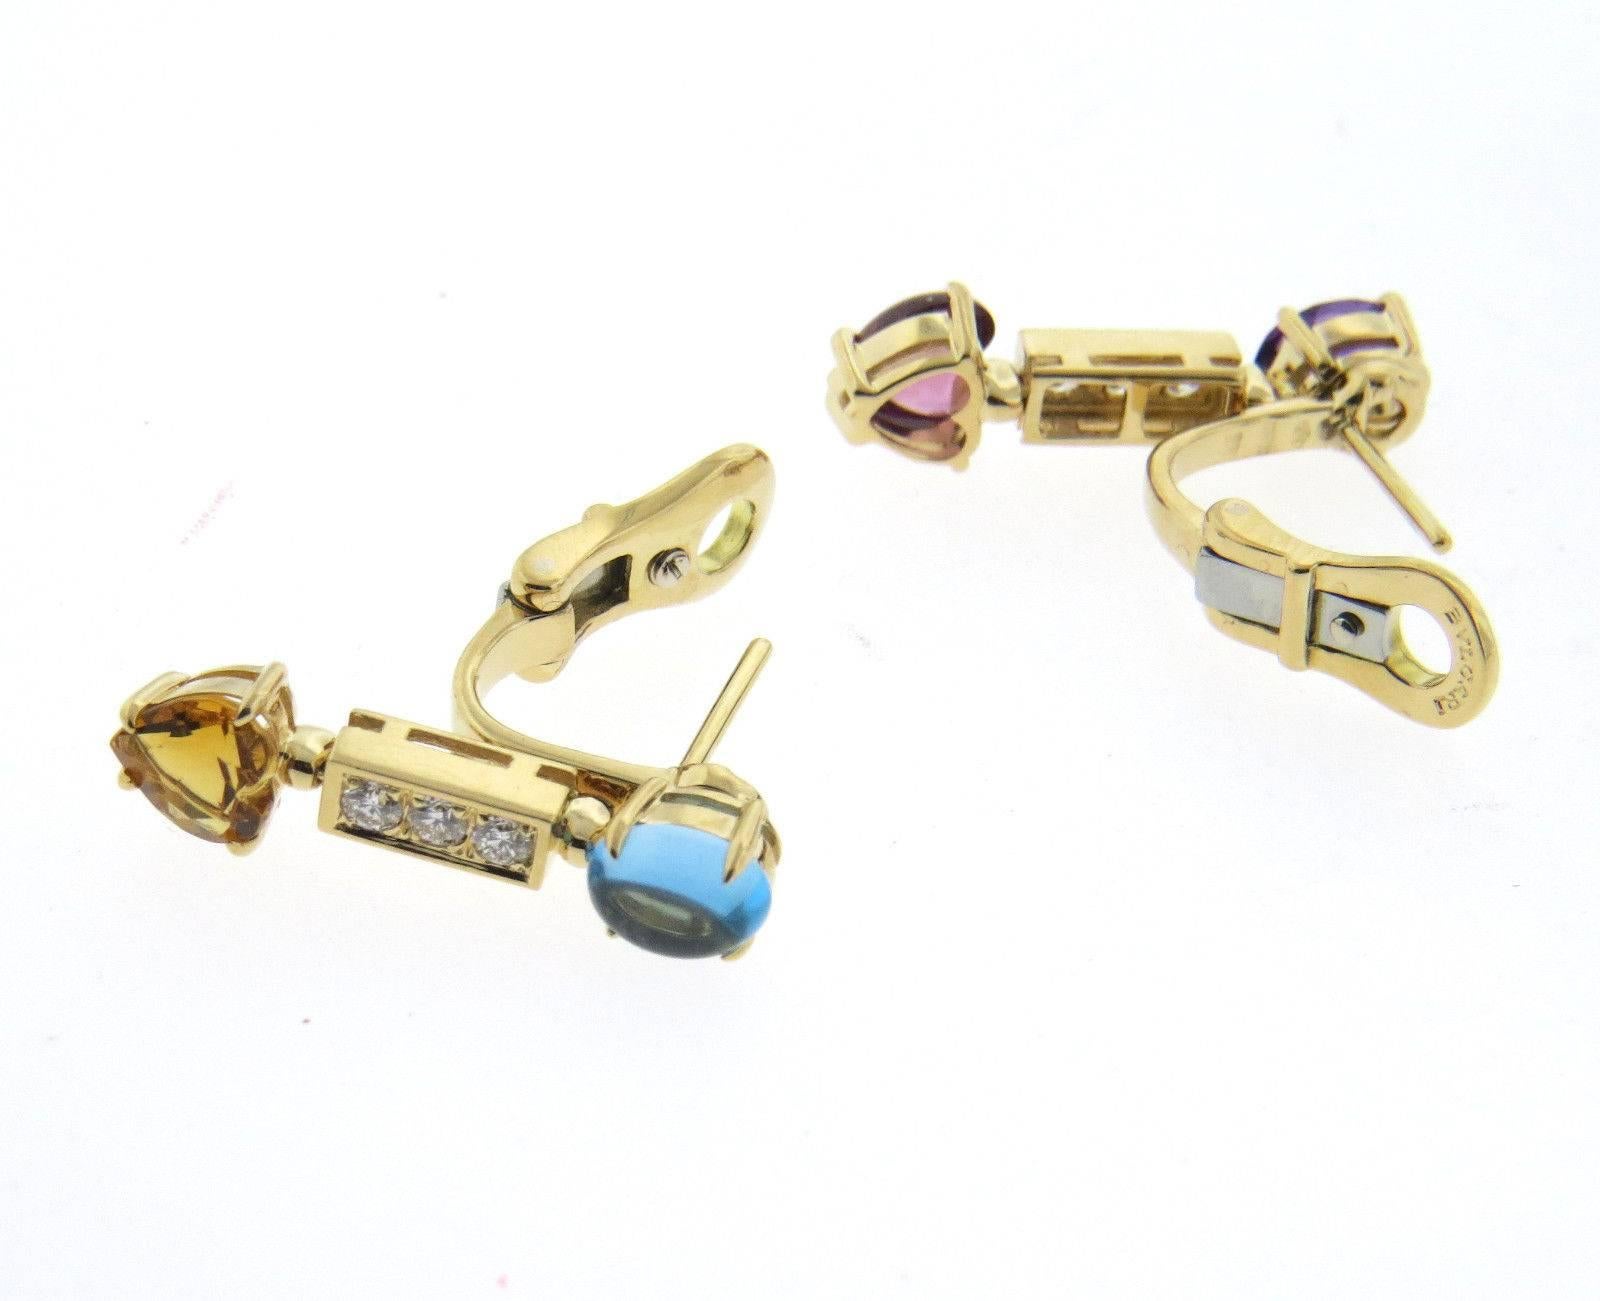 A pair of 18k yellow gold earrings set with approximately 0.18ctw of G/VS diamonds as well as topaz, citrine, amethyst, tourmaline.  The earrings are 25mm x 6.5mm and weigh 9.9 grams.  Marked: Bvlgari, made in Italy ,750.